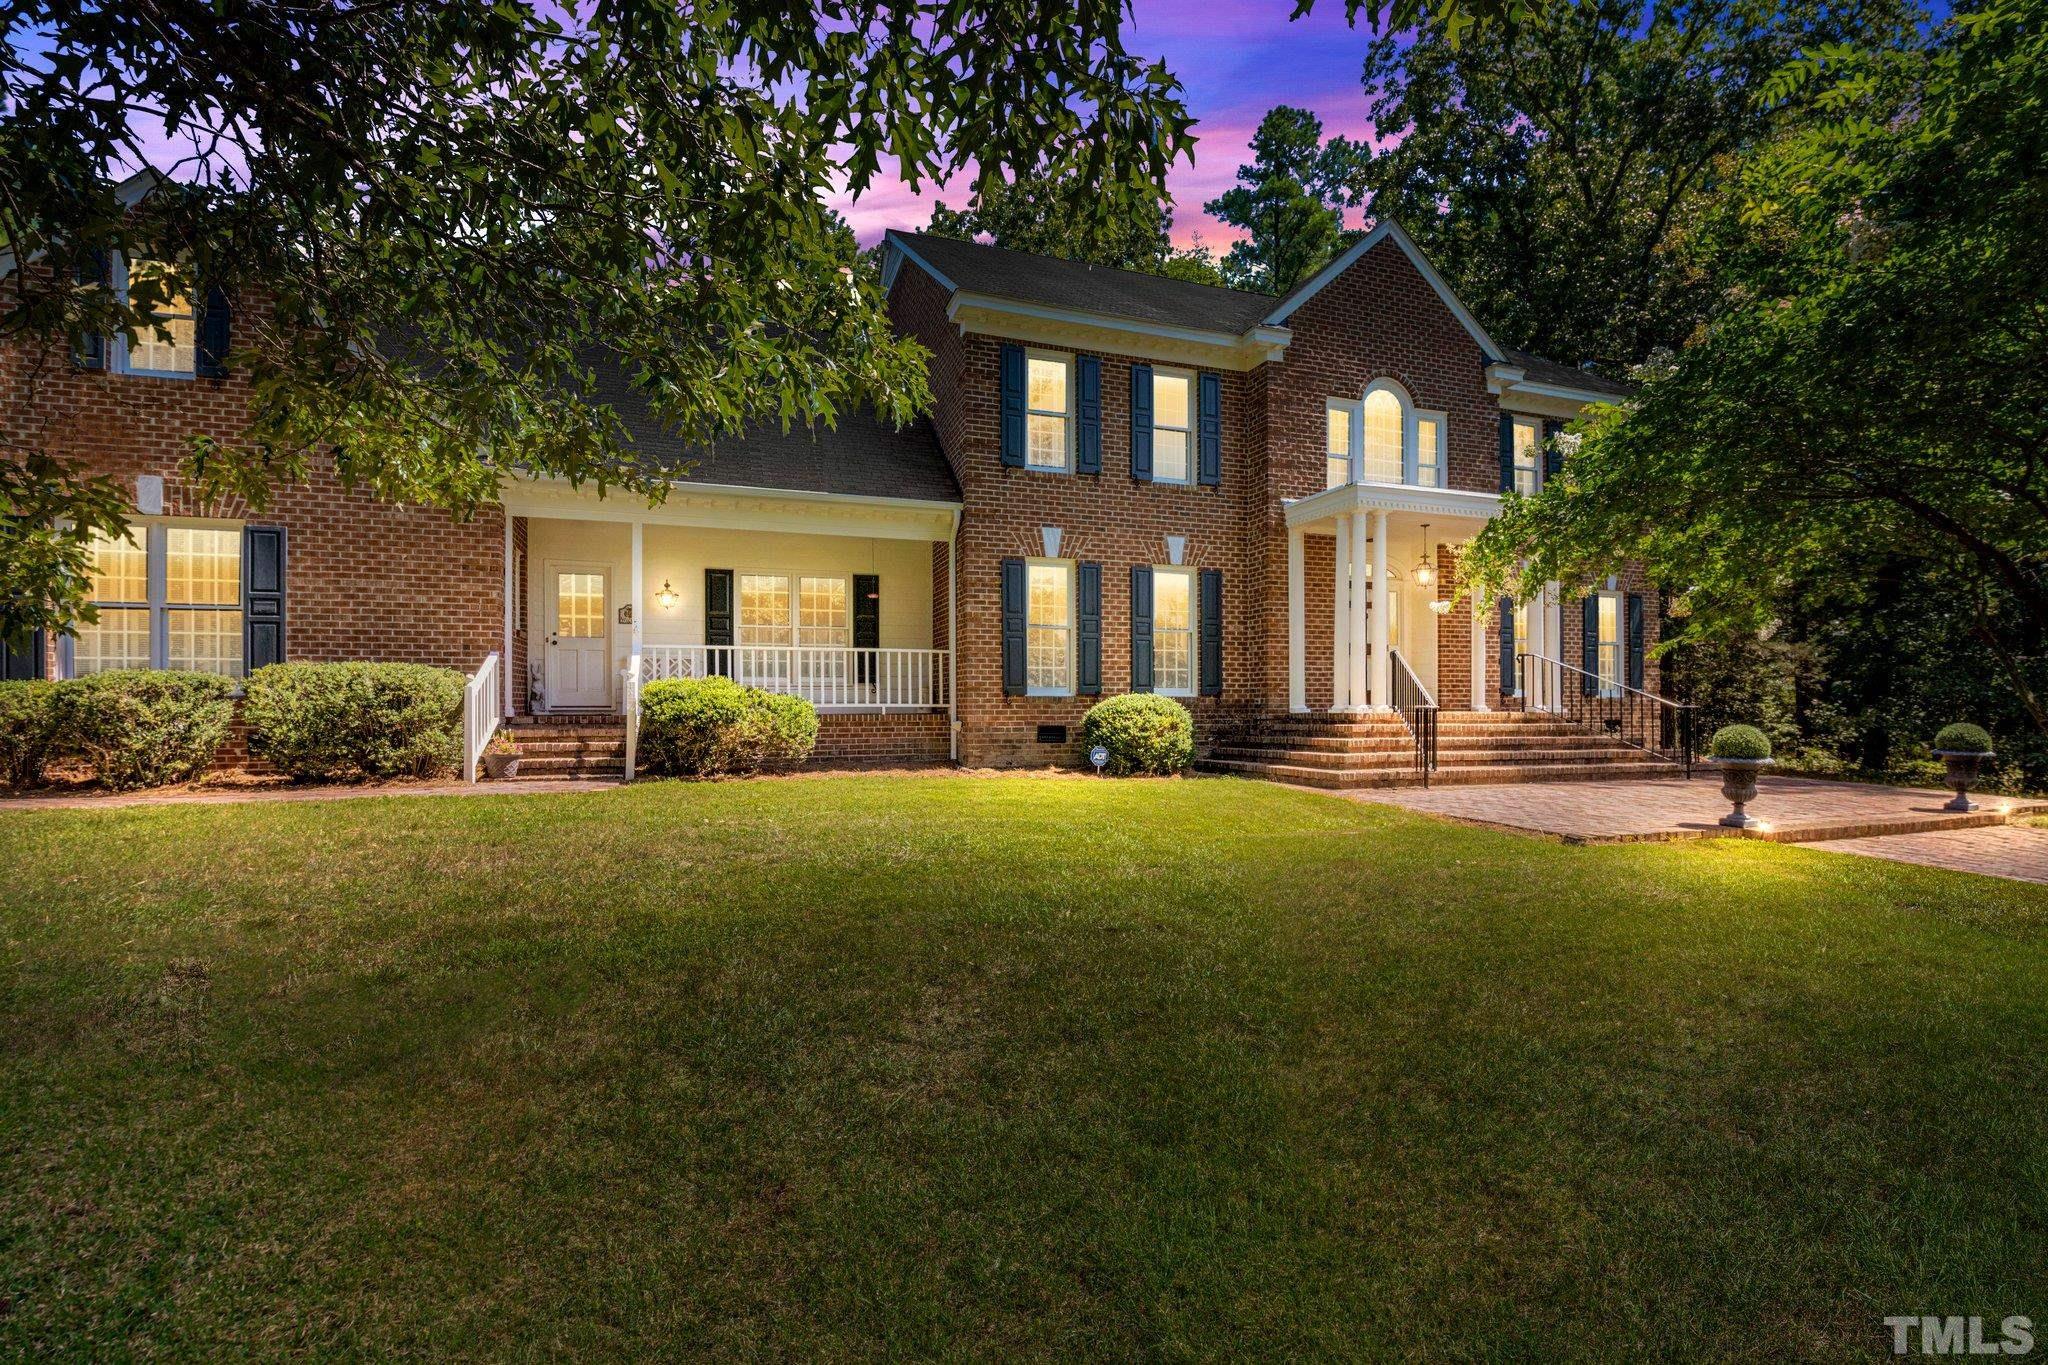 Welcome to 5101 Holly Ridge Farm Road. Gorgeous all brick custom home on 9.47 acres in Holly Ridge Farm.